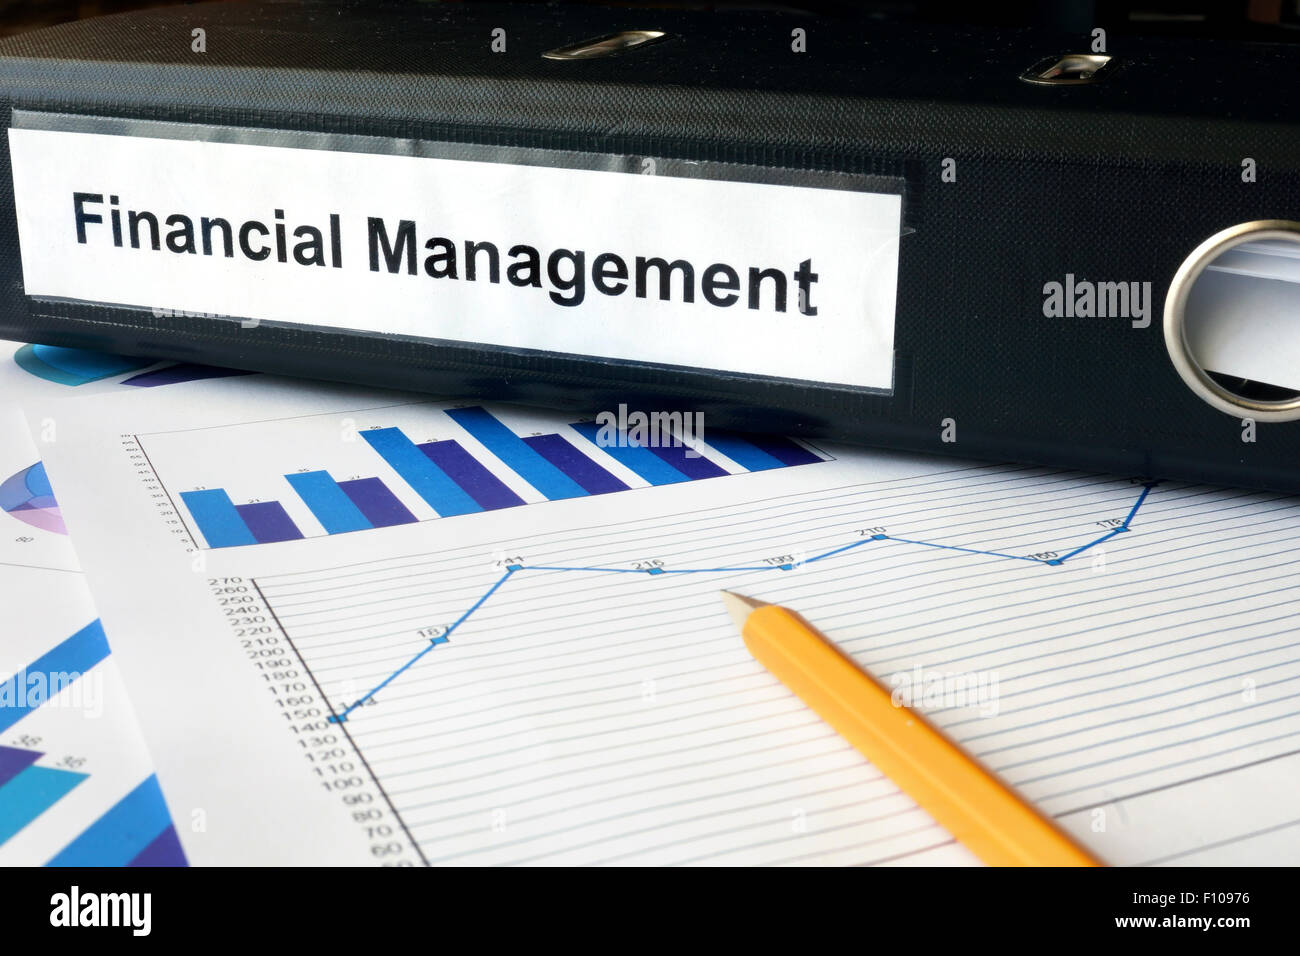 Graphs and file folder with label Financial Management. Business concept. Stock Photo